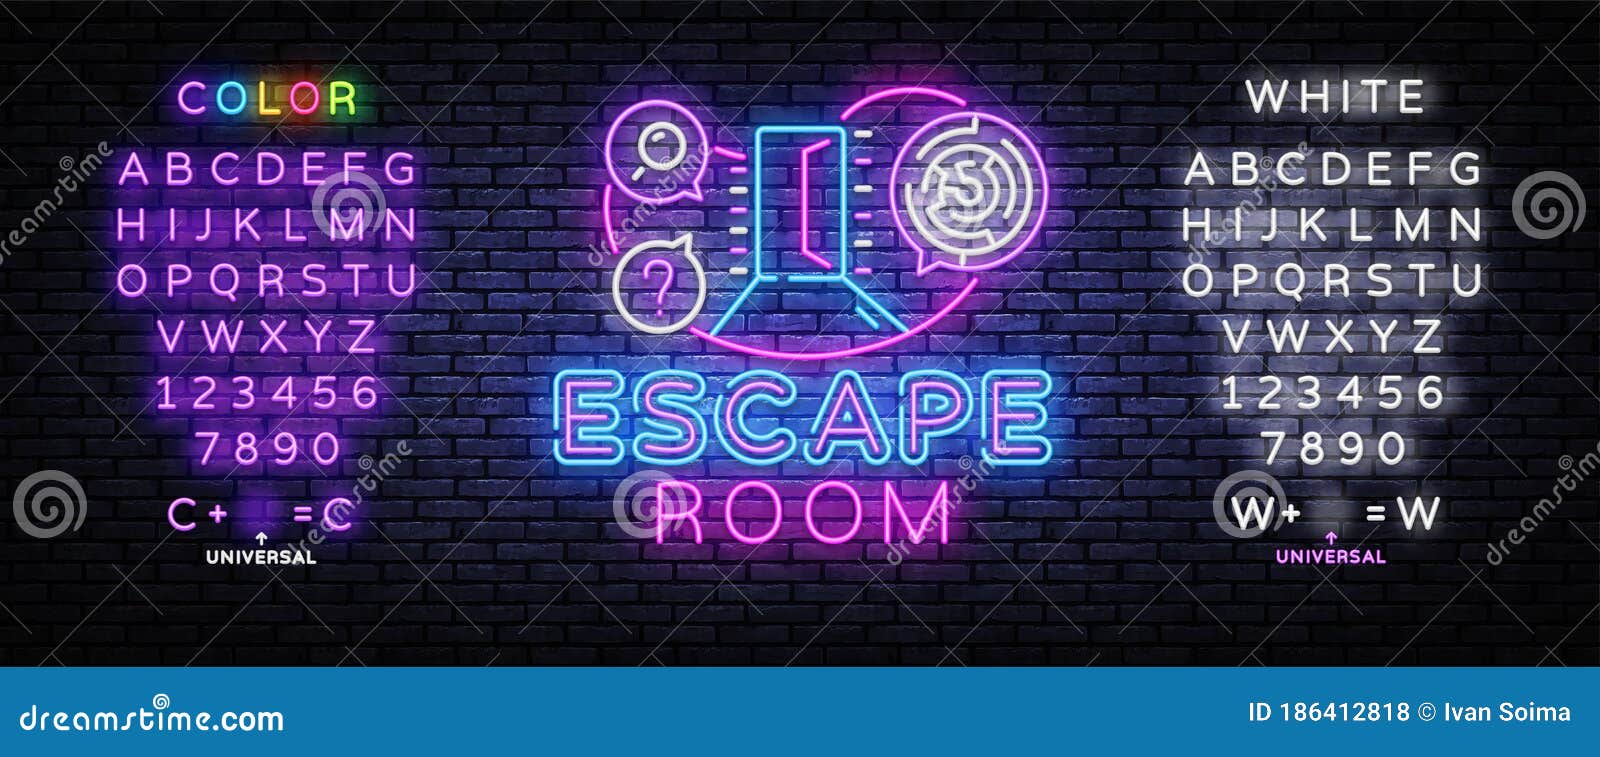 real-life room escape neon sign . quest game poster neon  temlate. editing text neon sign